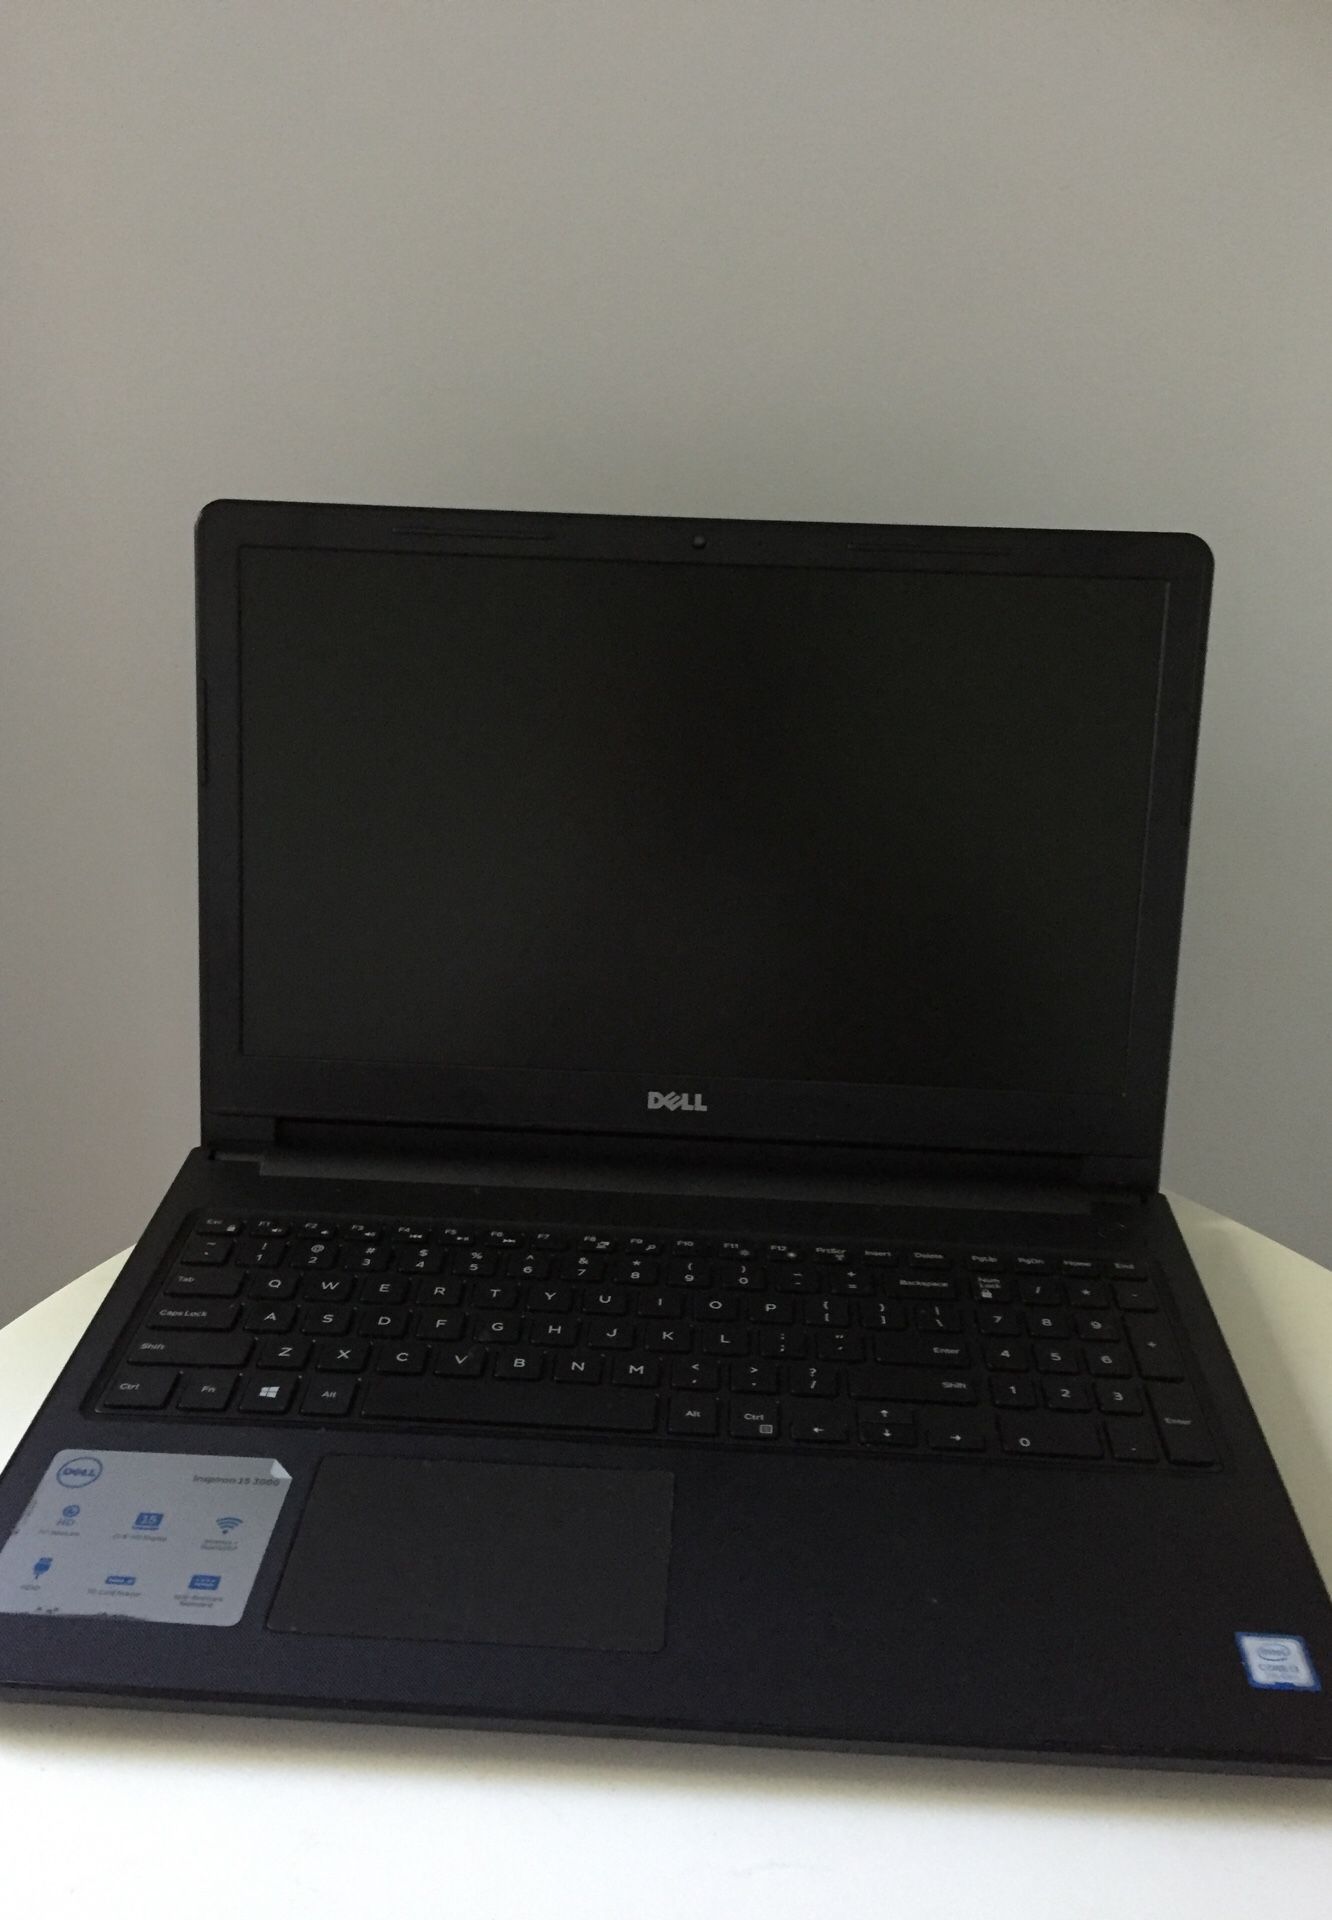 Dell notebooks